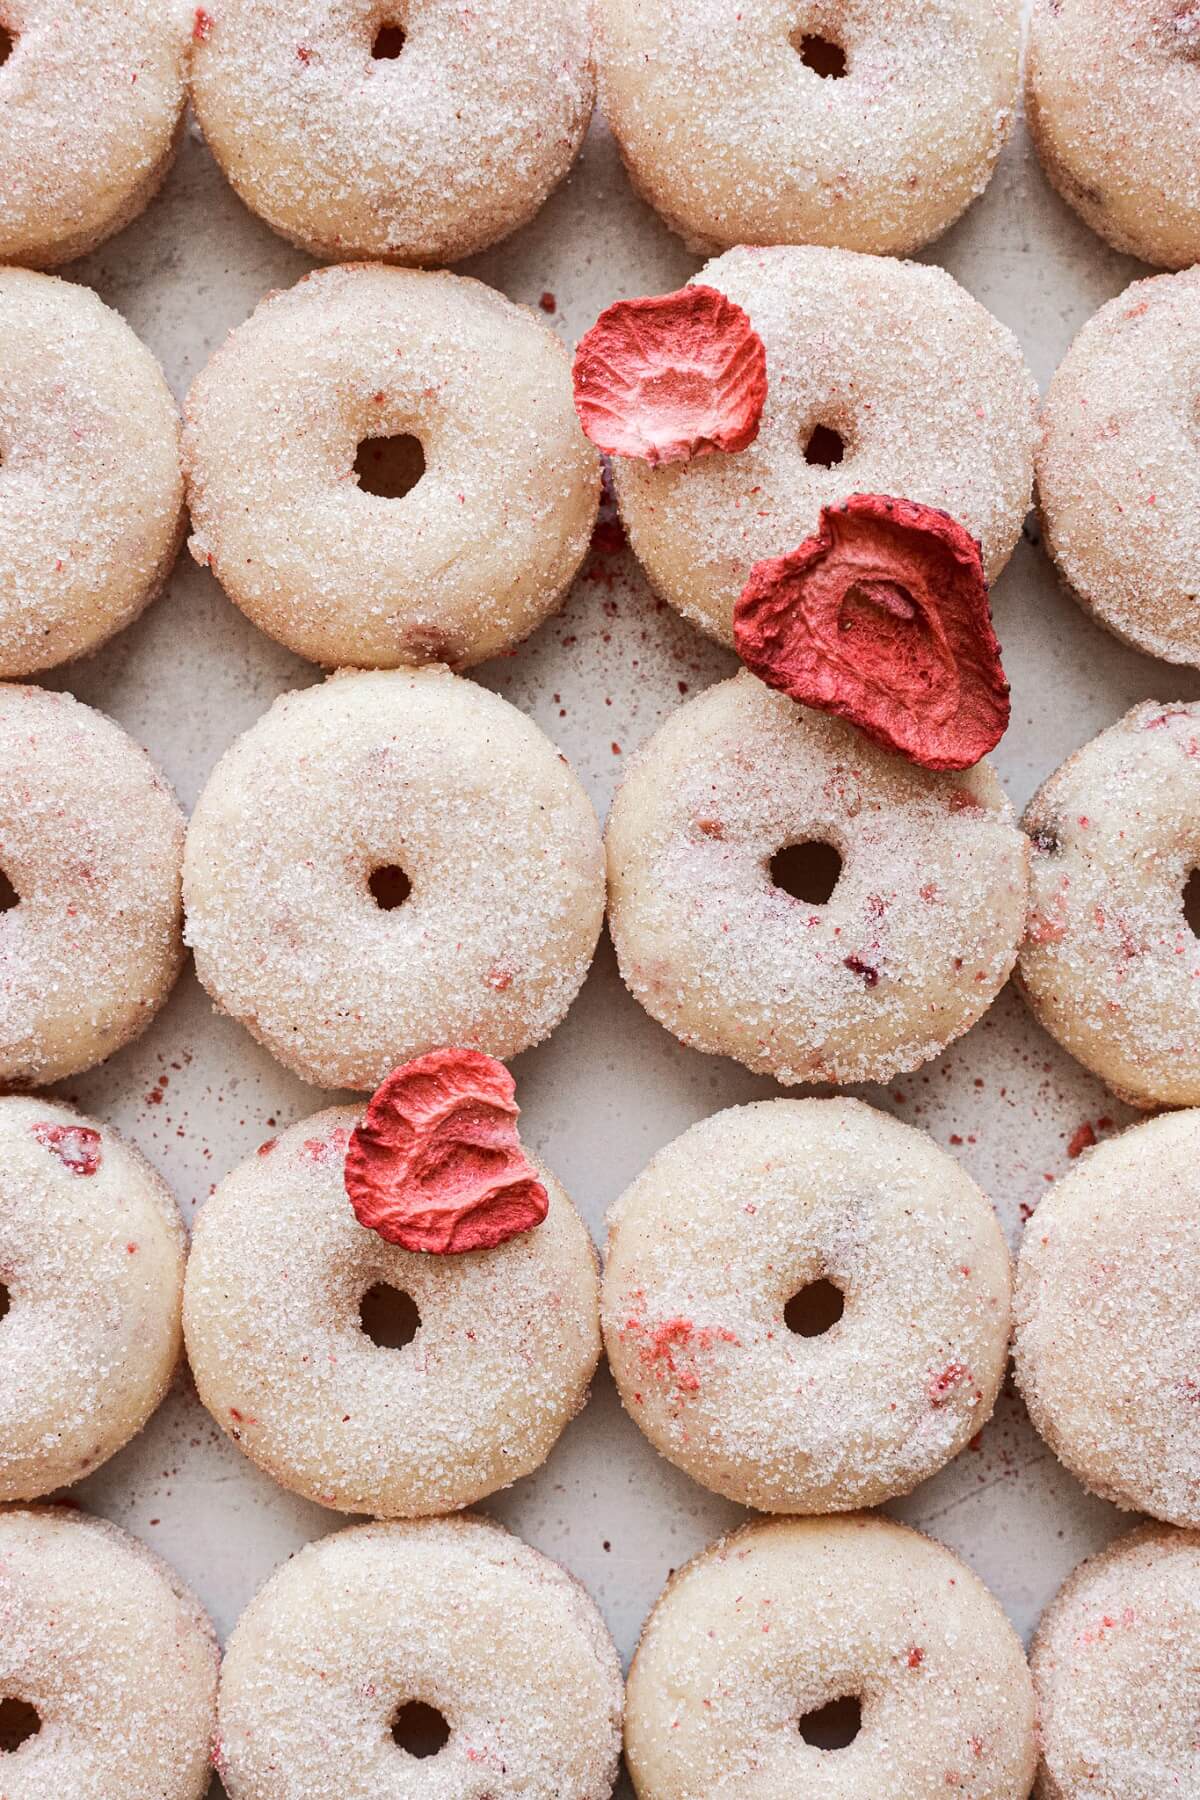 Baked mini strawberry donuts coated in strawberry sugar.